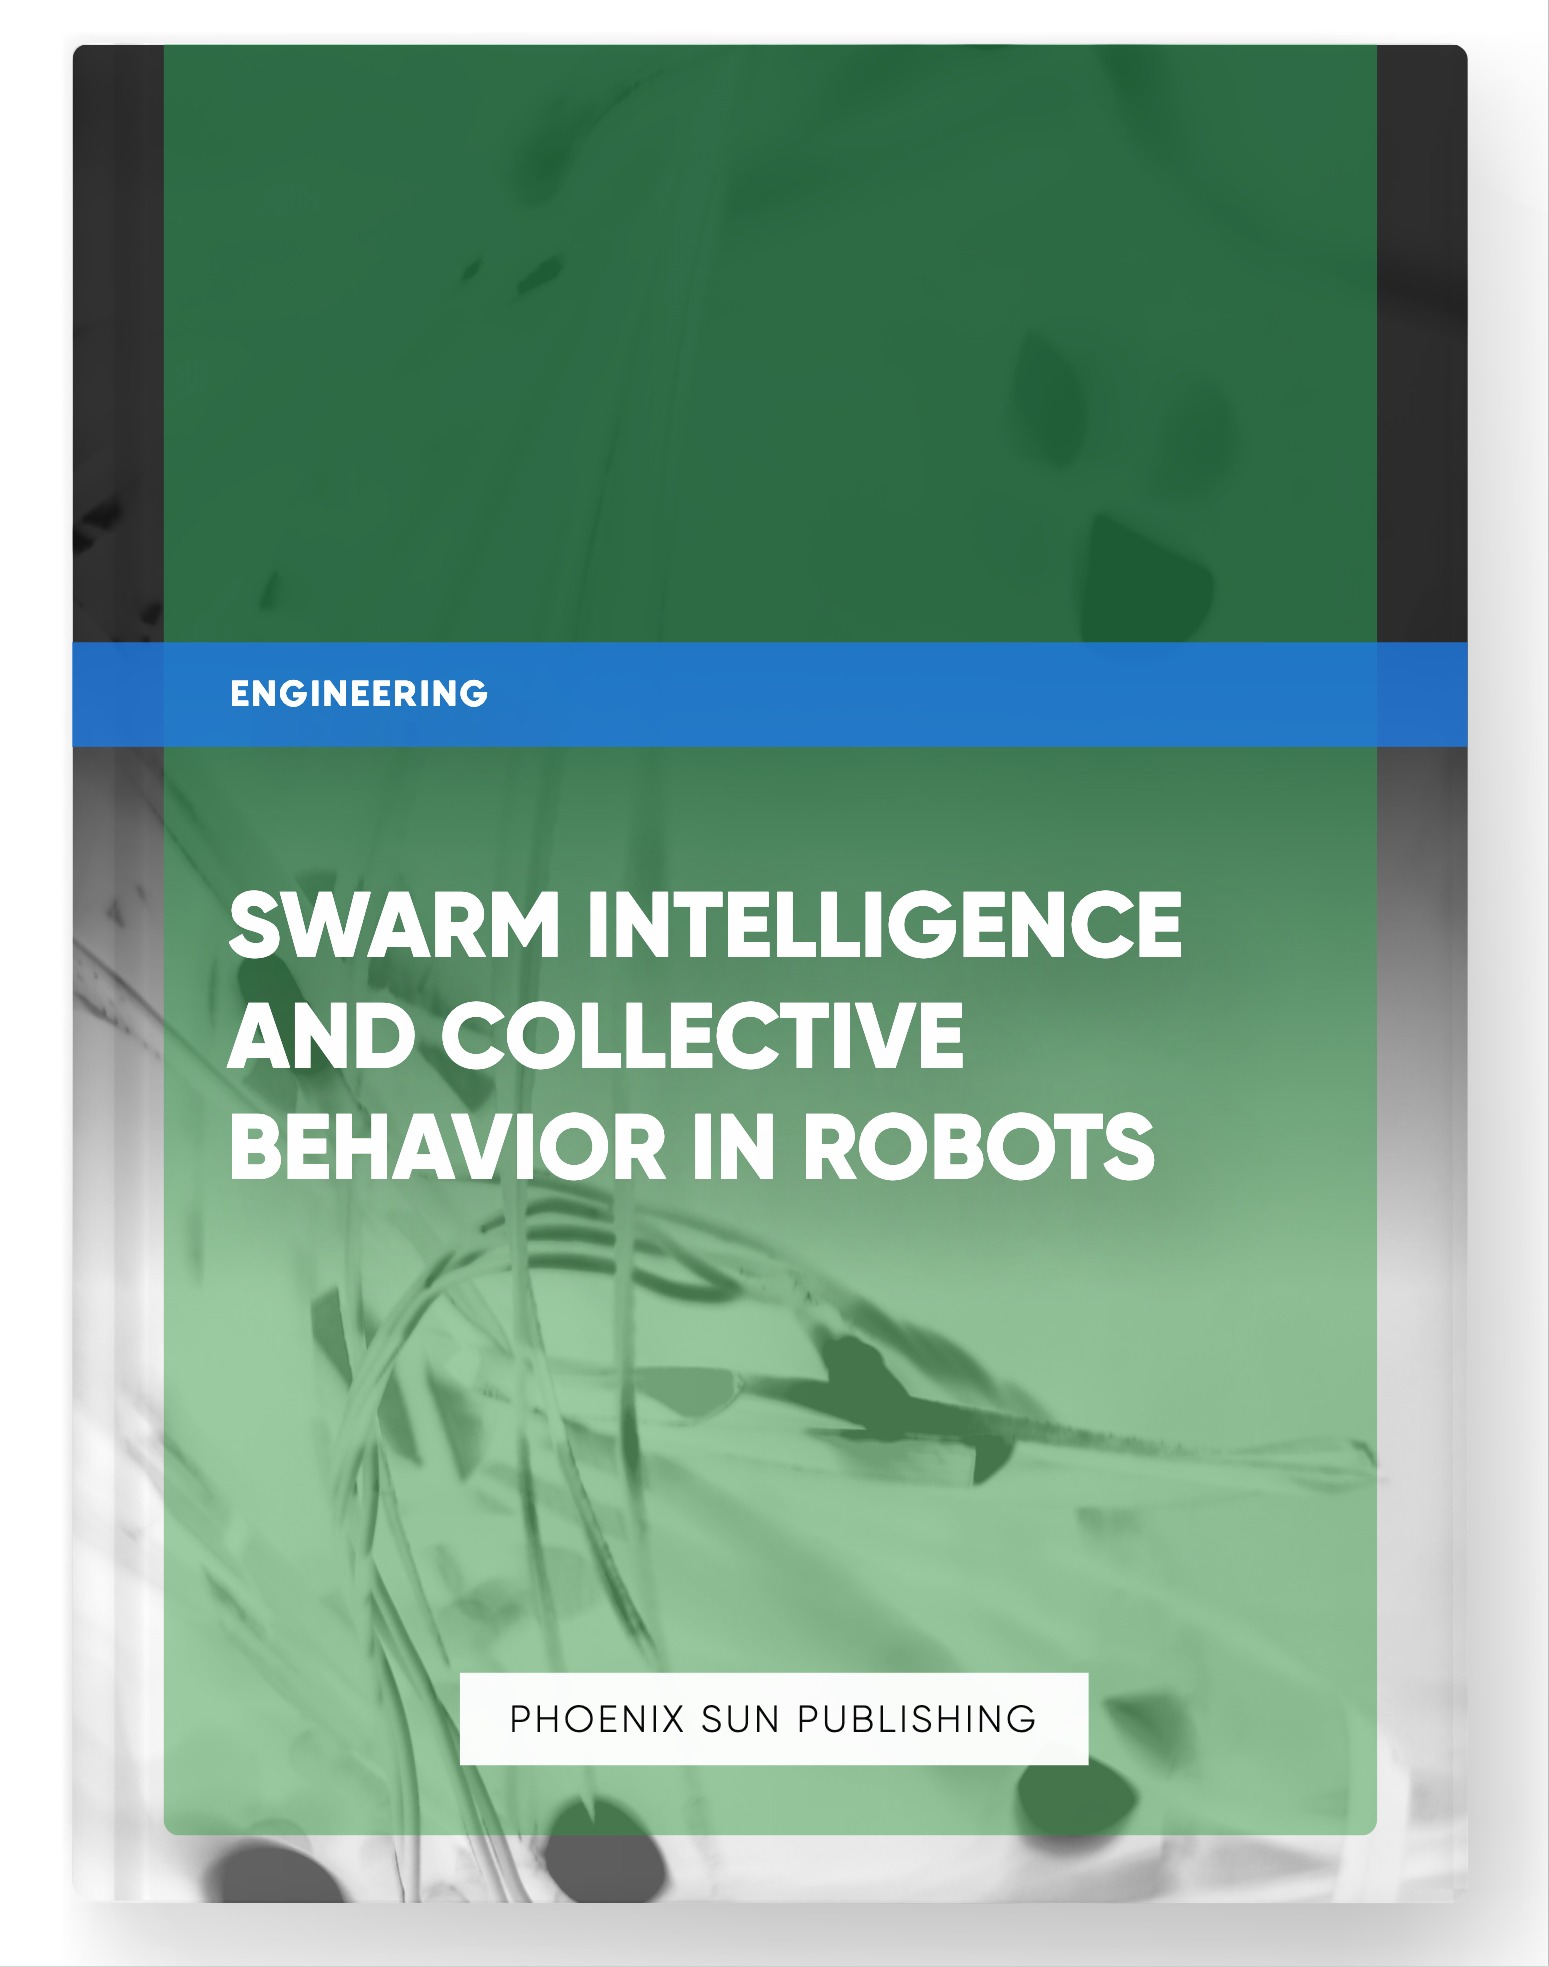 Swarm Intelligence and Collective Behavior in Robots